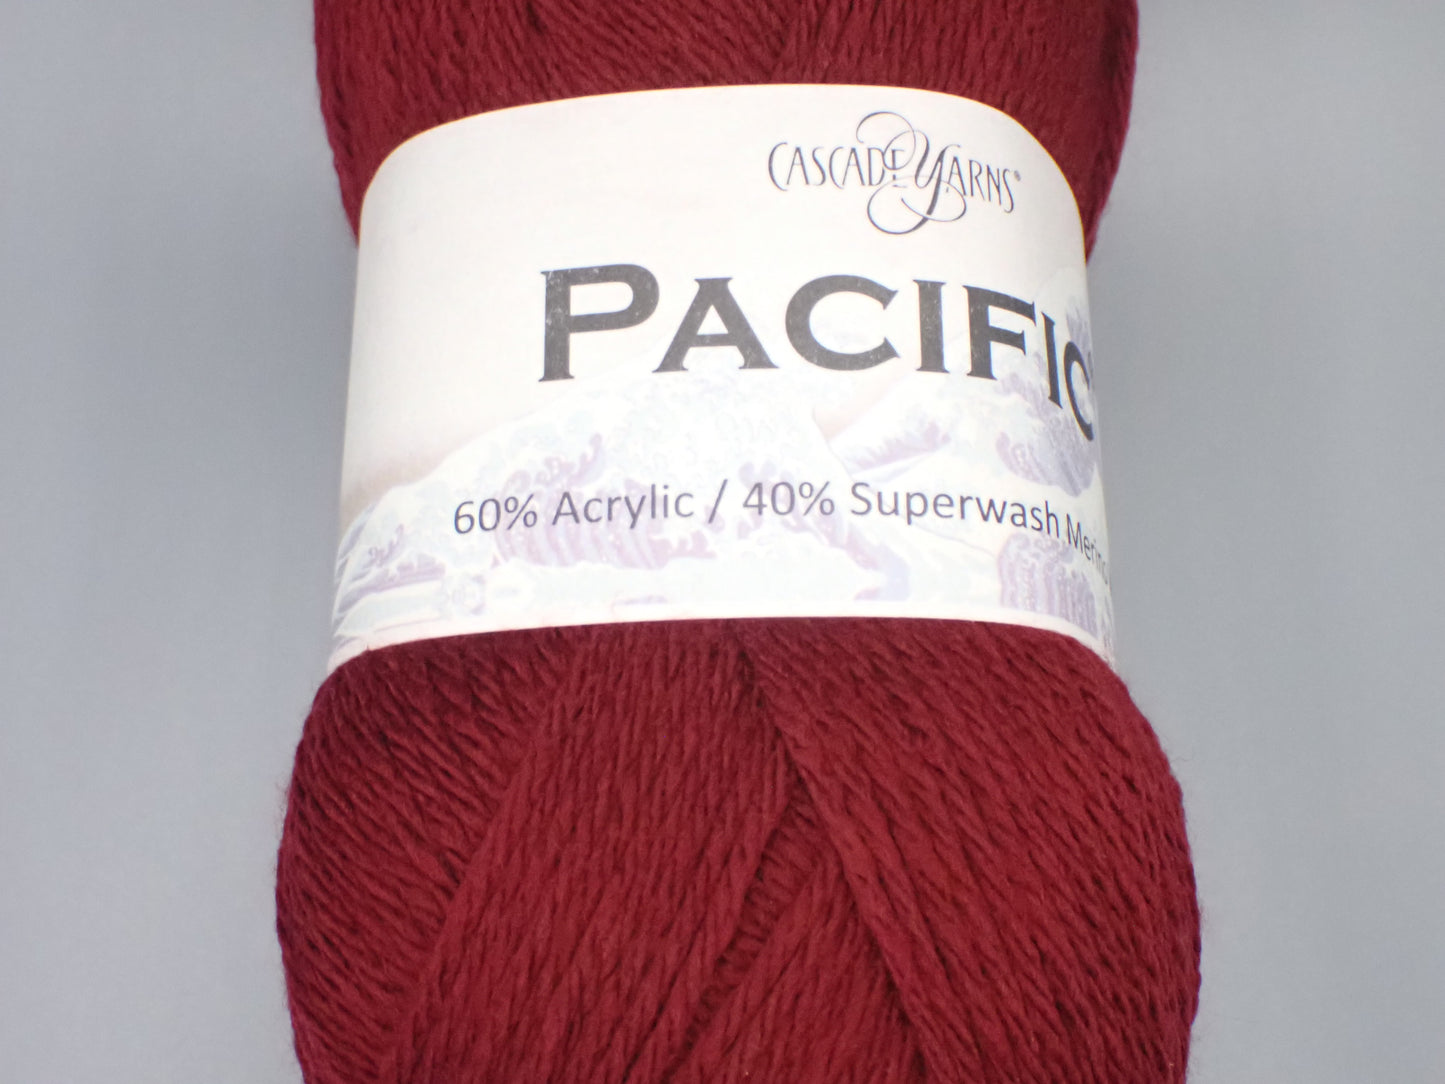 Cascade Yarns Pacific worsted weight Bordeaux